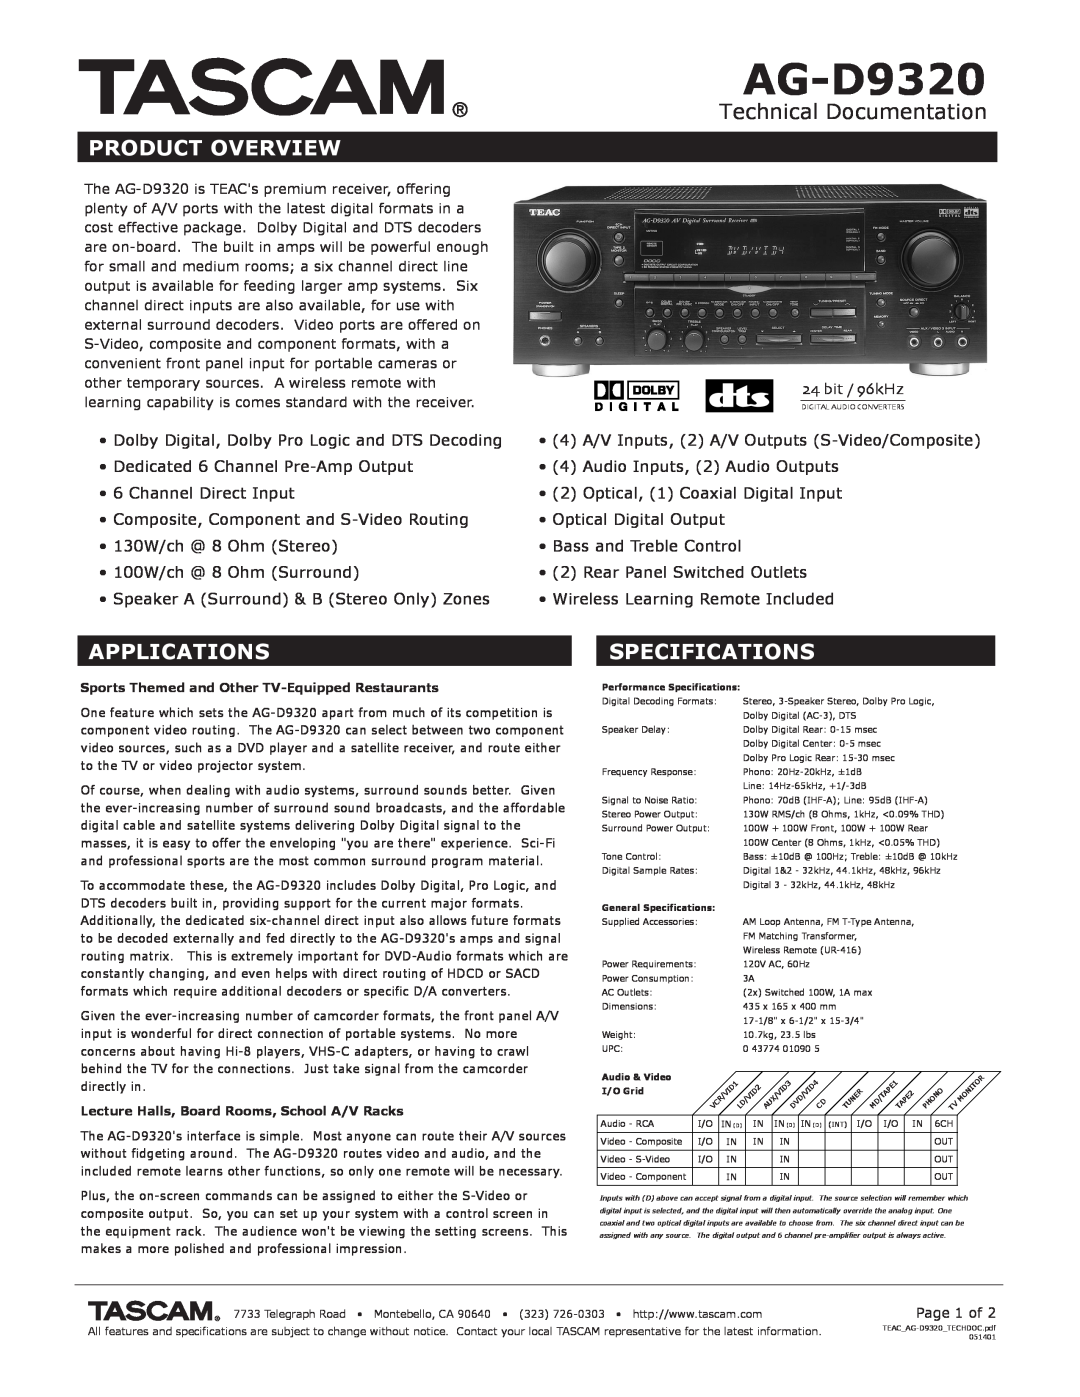 Tascam AG-D9320 specifications Technical Documentation, Product Overview, Applications, Specifications 